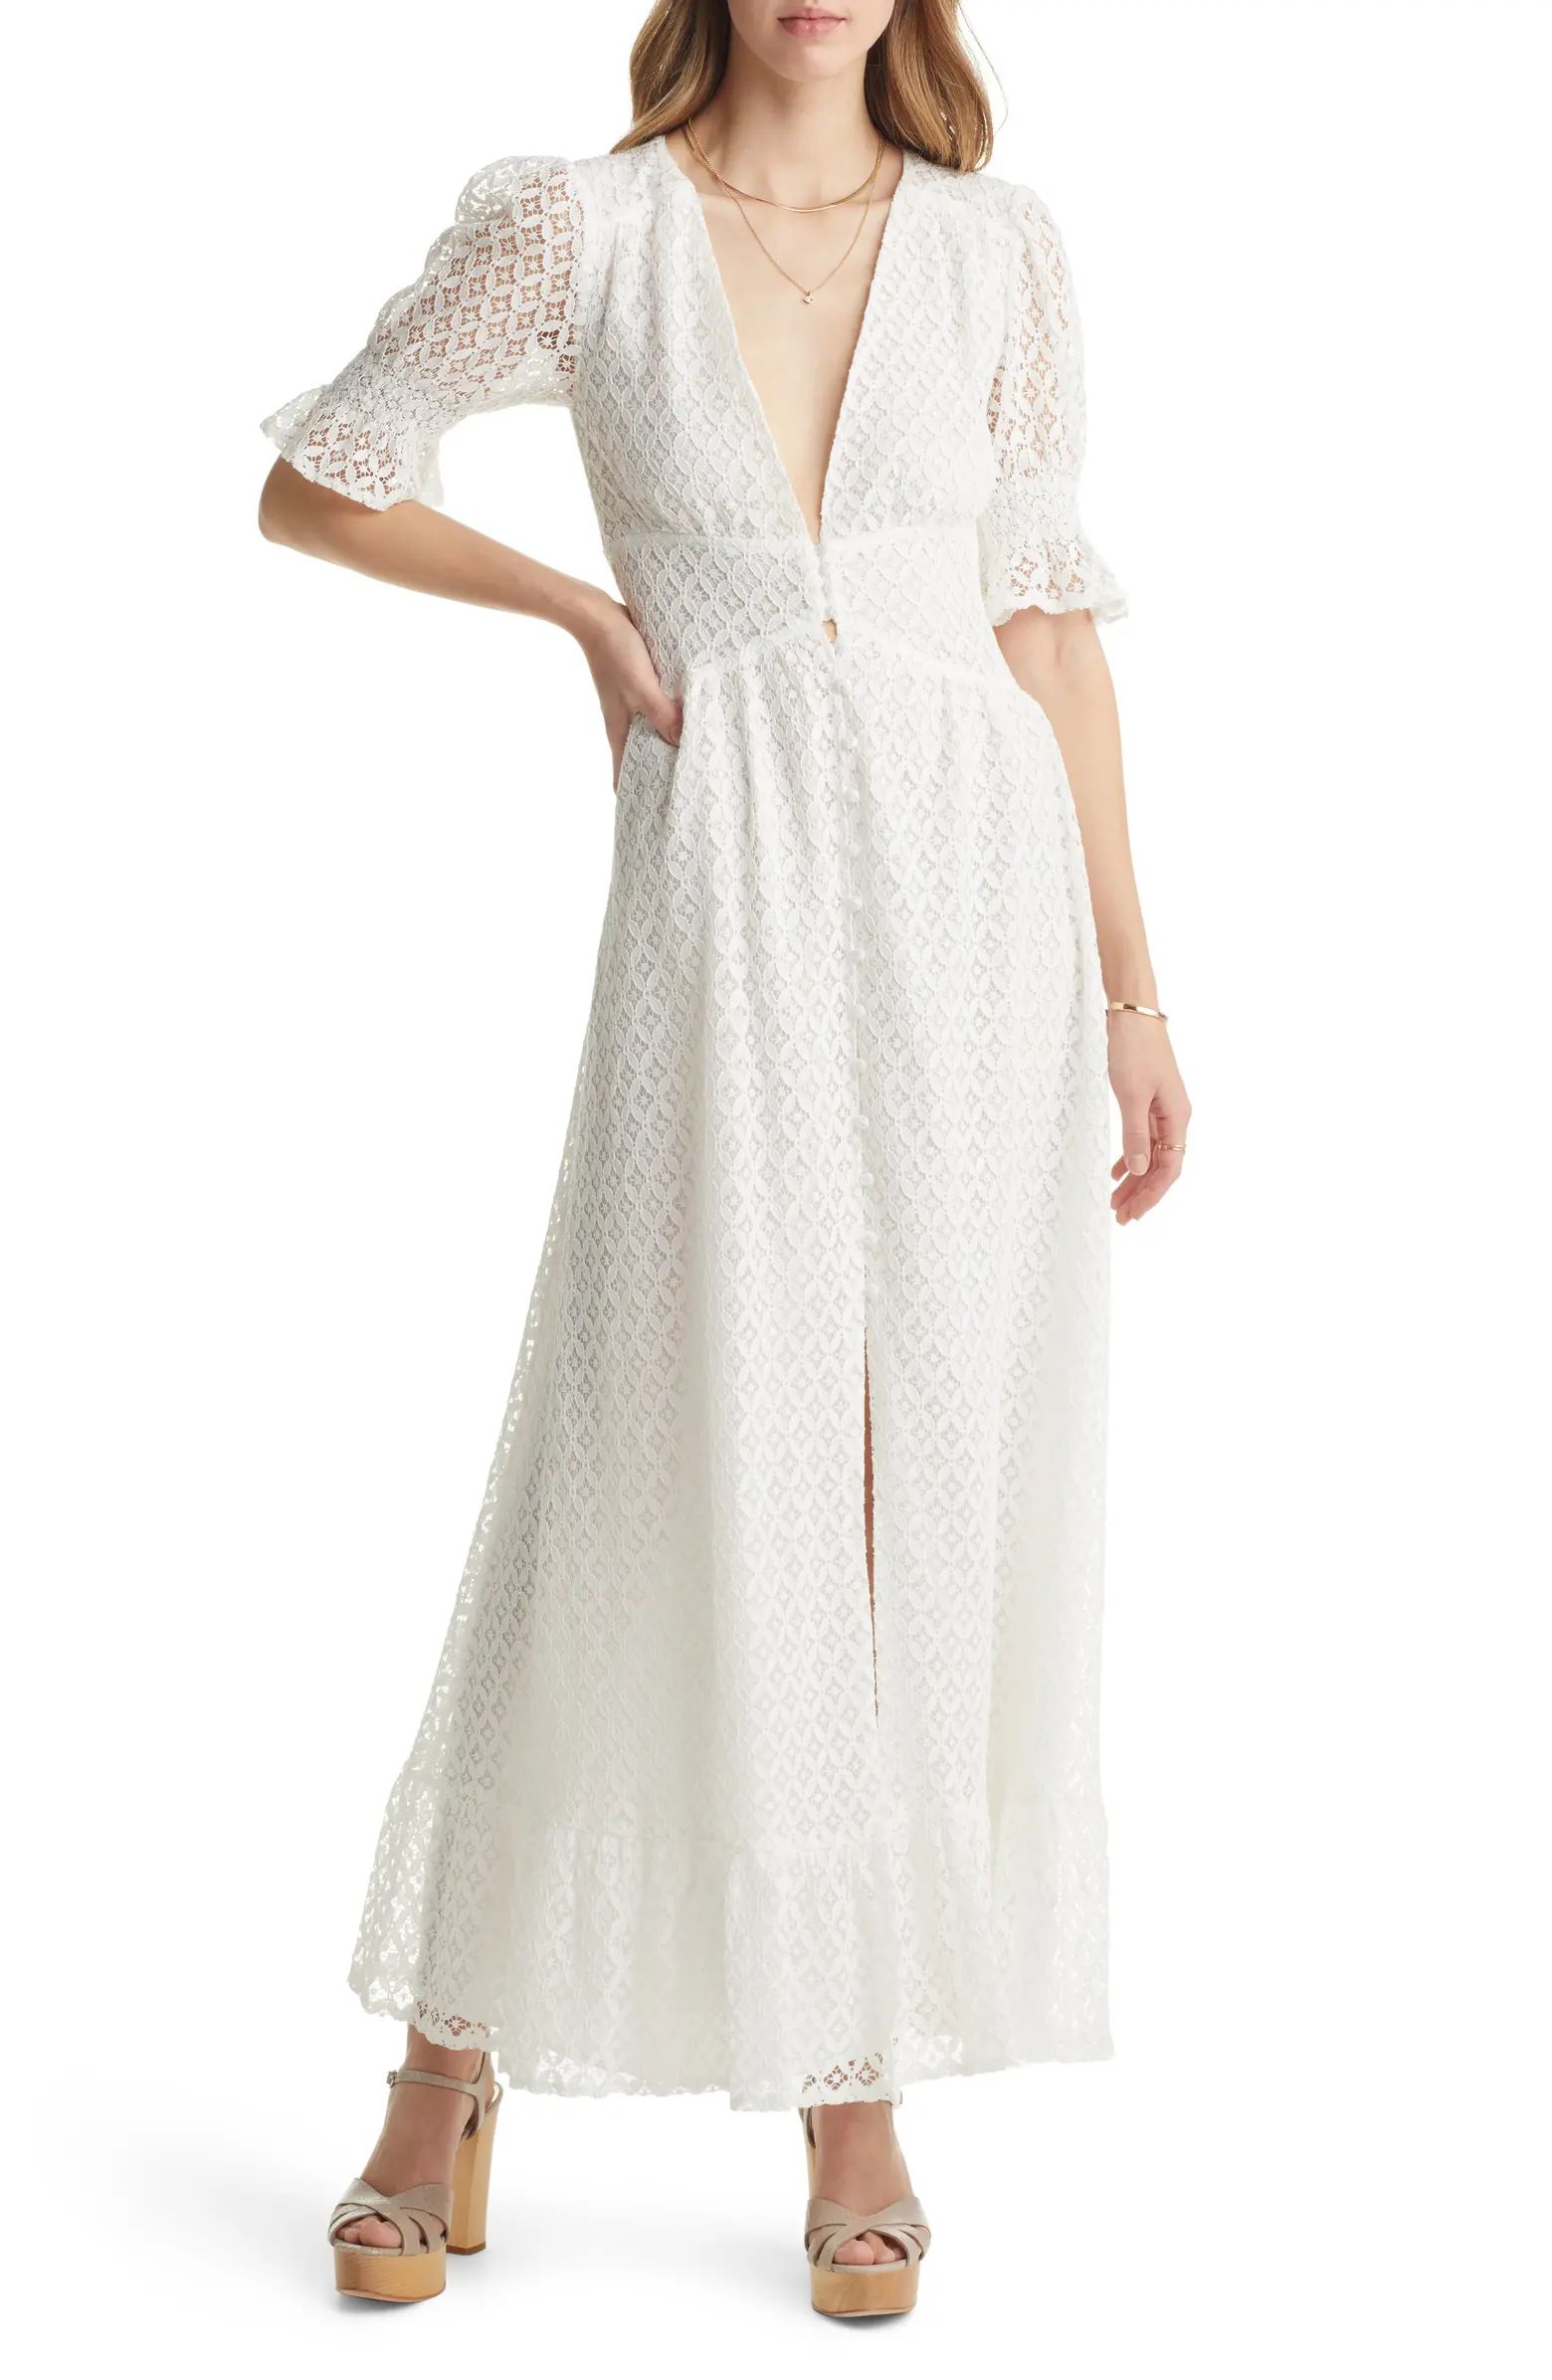 Lace Puff Sleeve Maxi Dress | Nordstrom